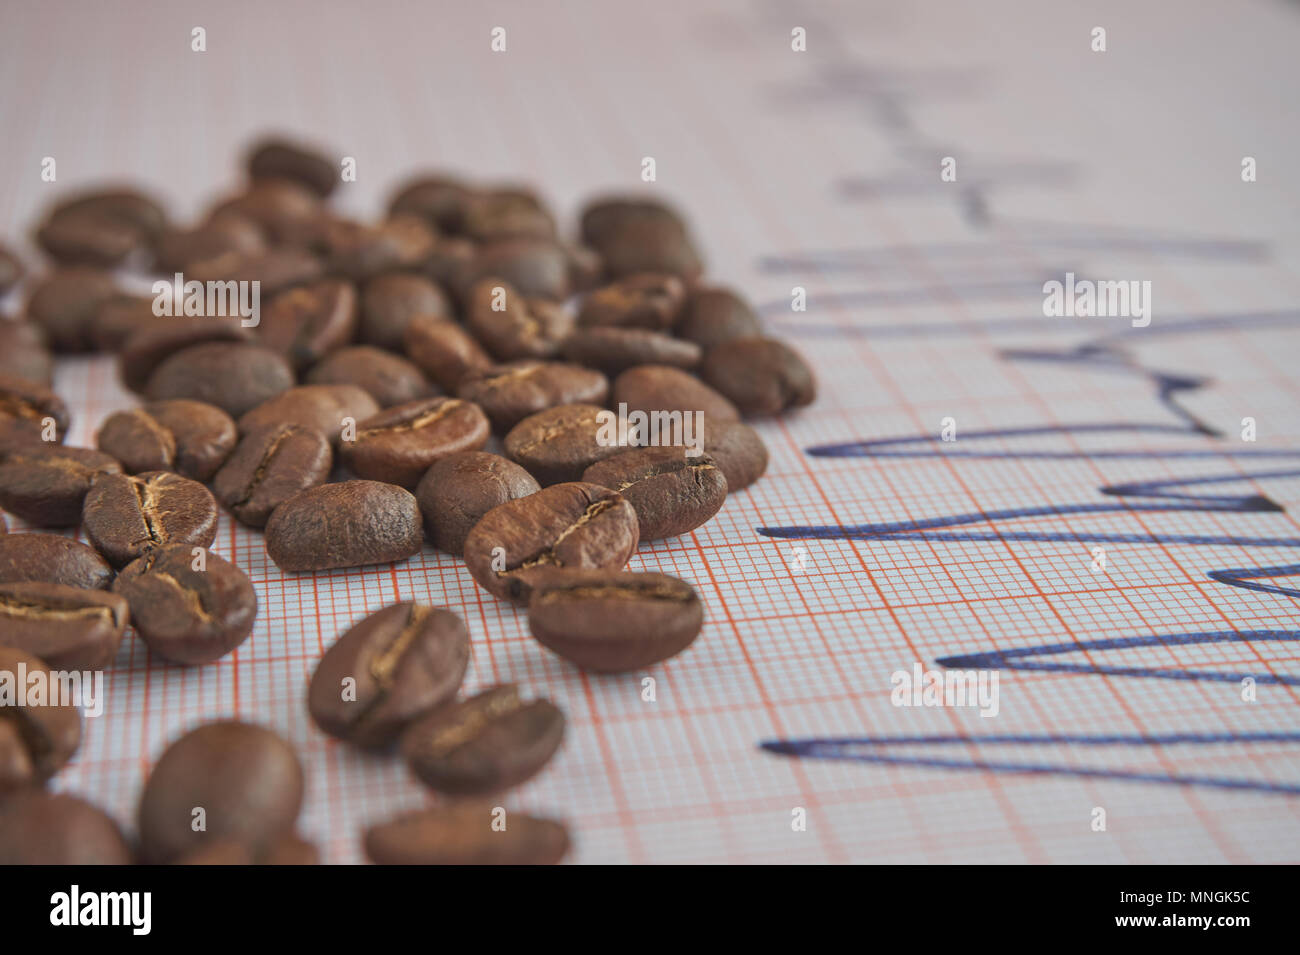 Loose roasted coffee beans on an ECG tracing showing an increased heart beat conceptual of coffee as a stimulant and its health implications Stock Photo